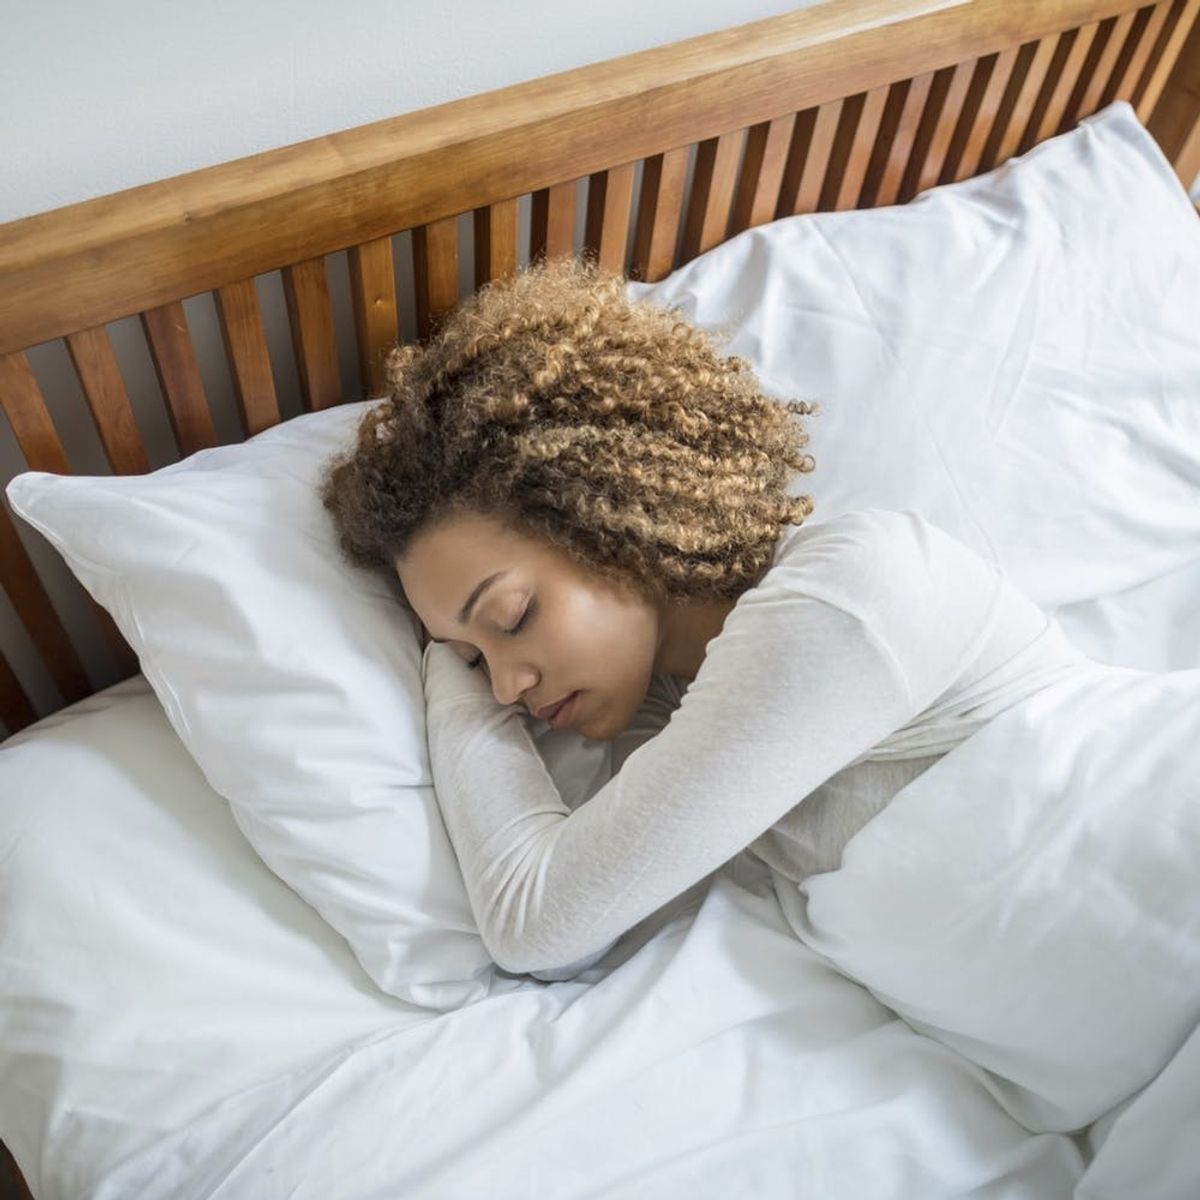 This Is Why You Need to Care About Your Sleep Posture